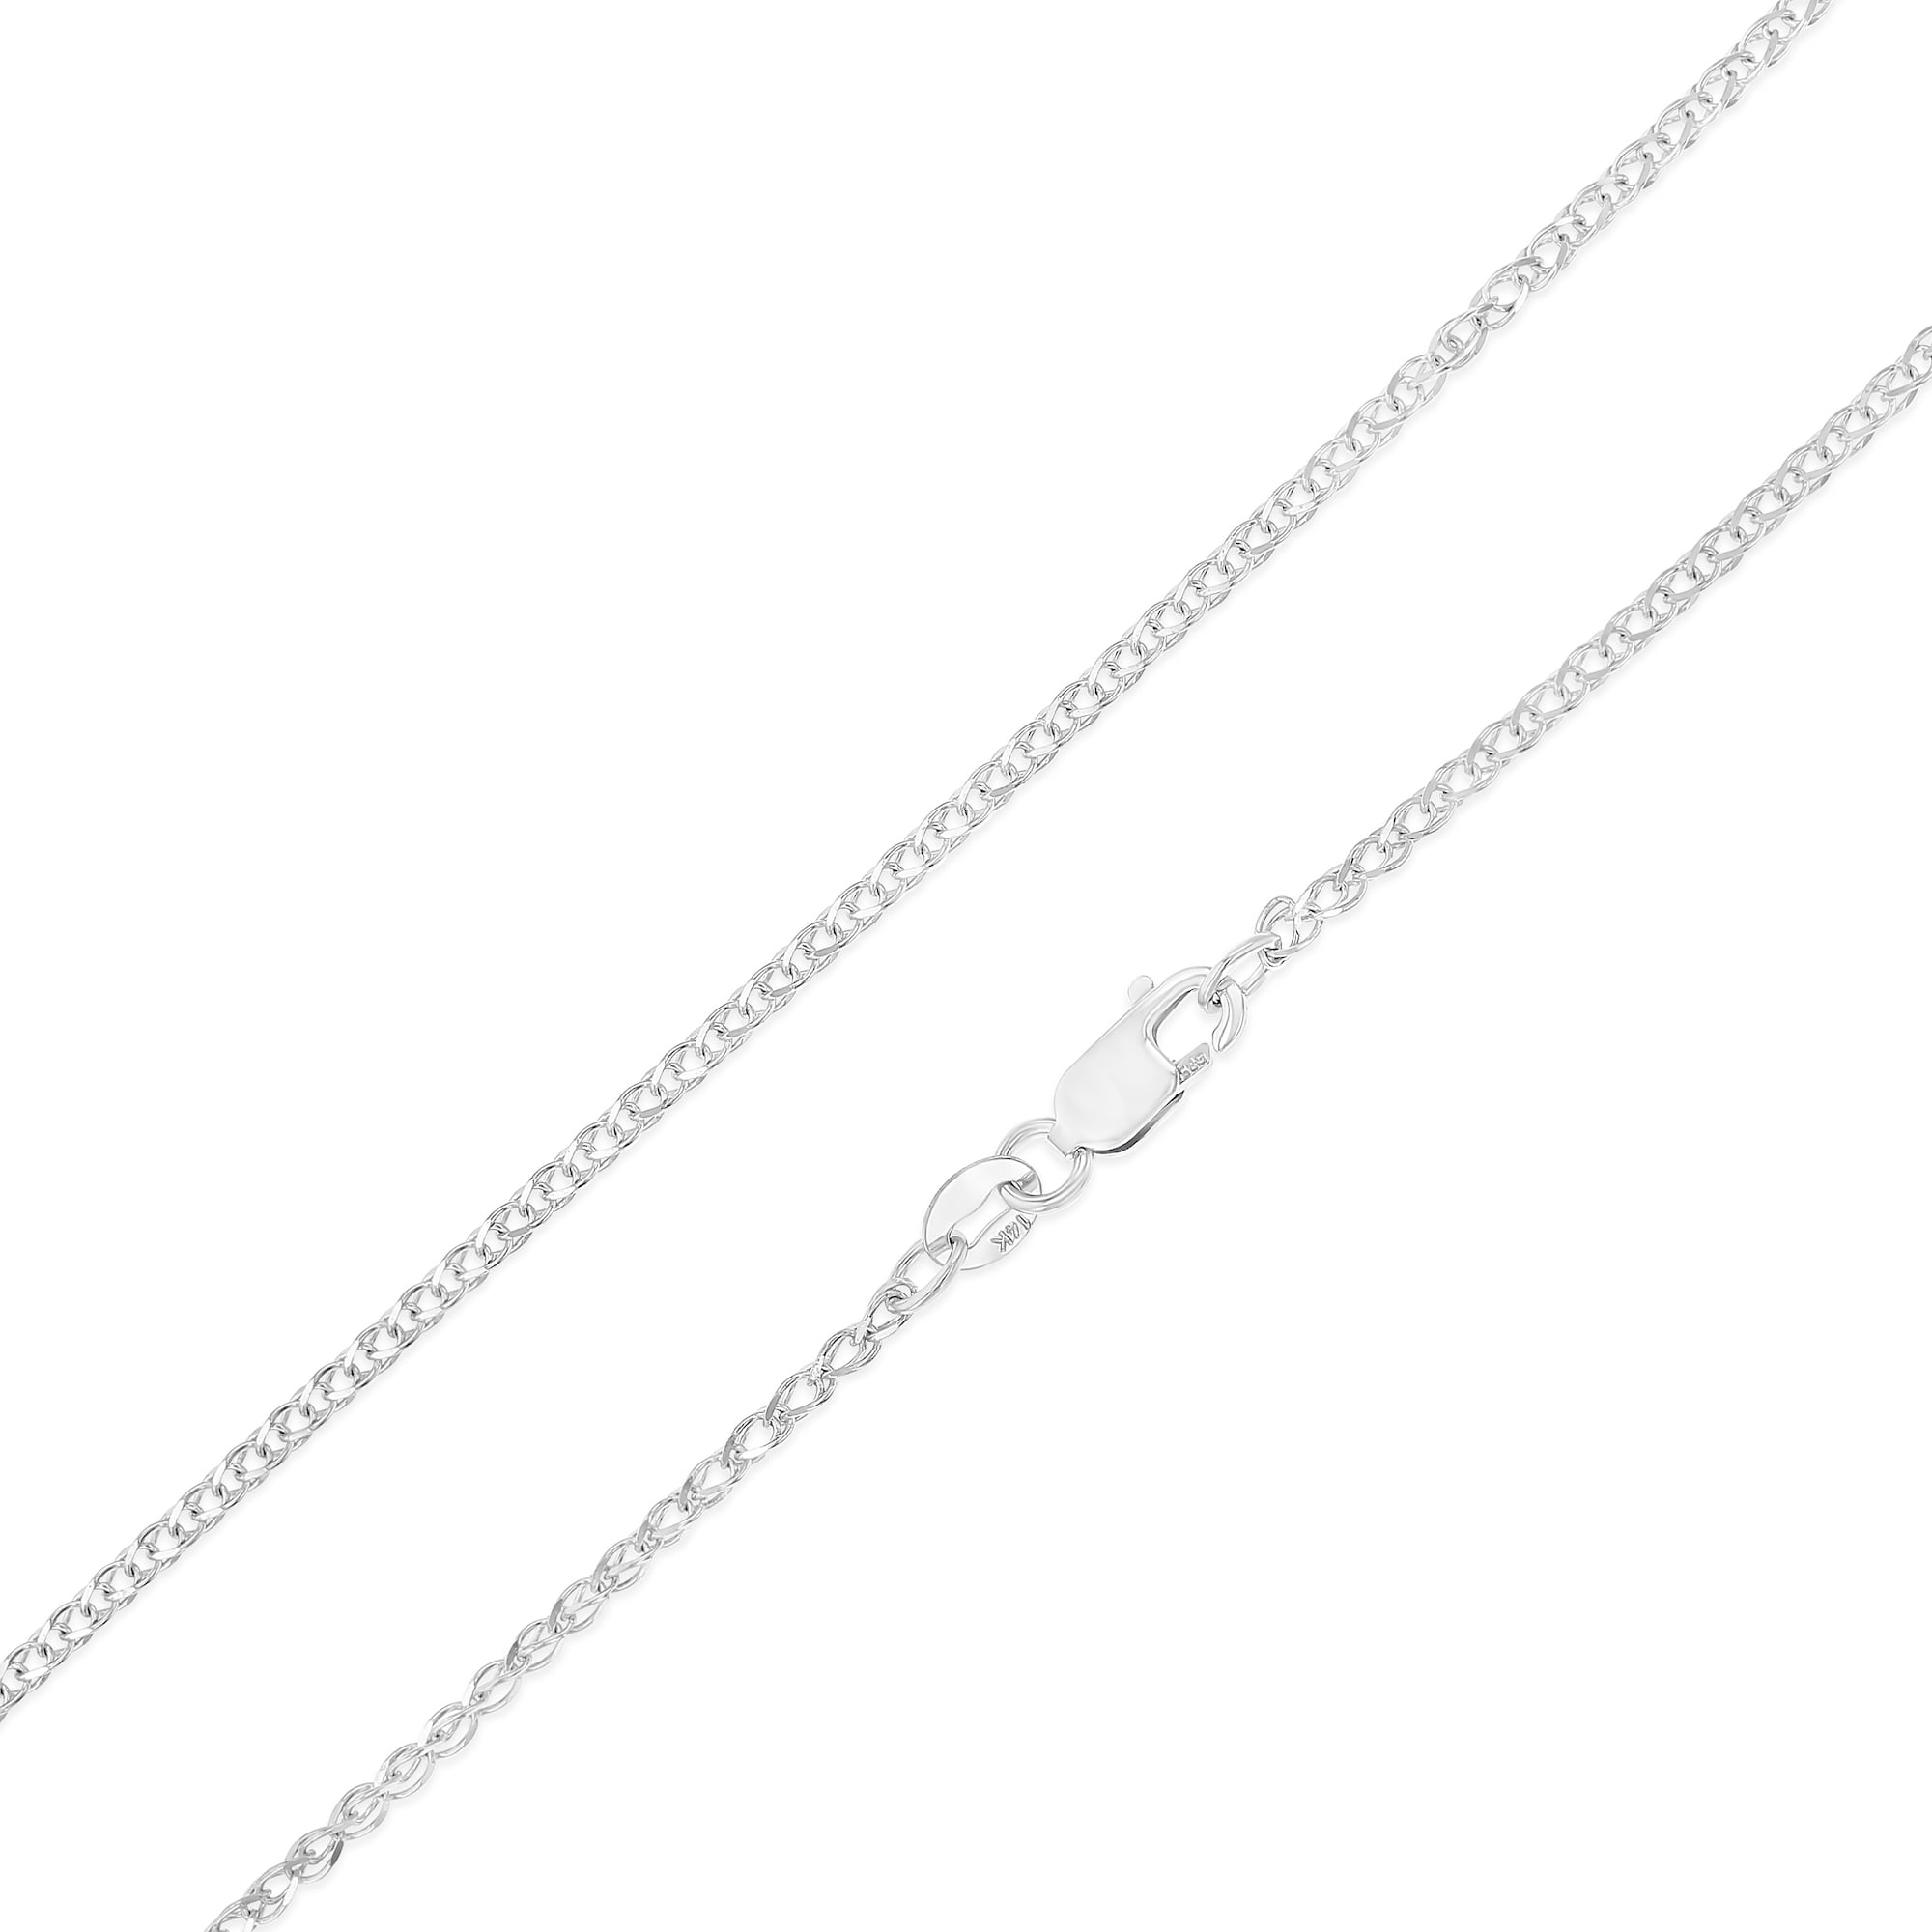 Solid 14k Yellow Gold 1.70mm Singapore Twist Chain Necklace with Secure Lobster Lock Clasp 20